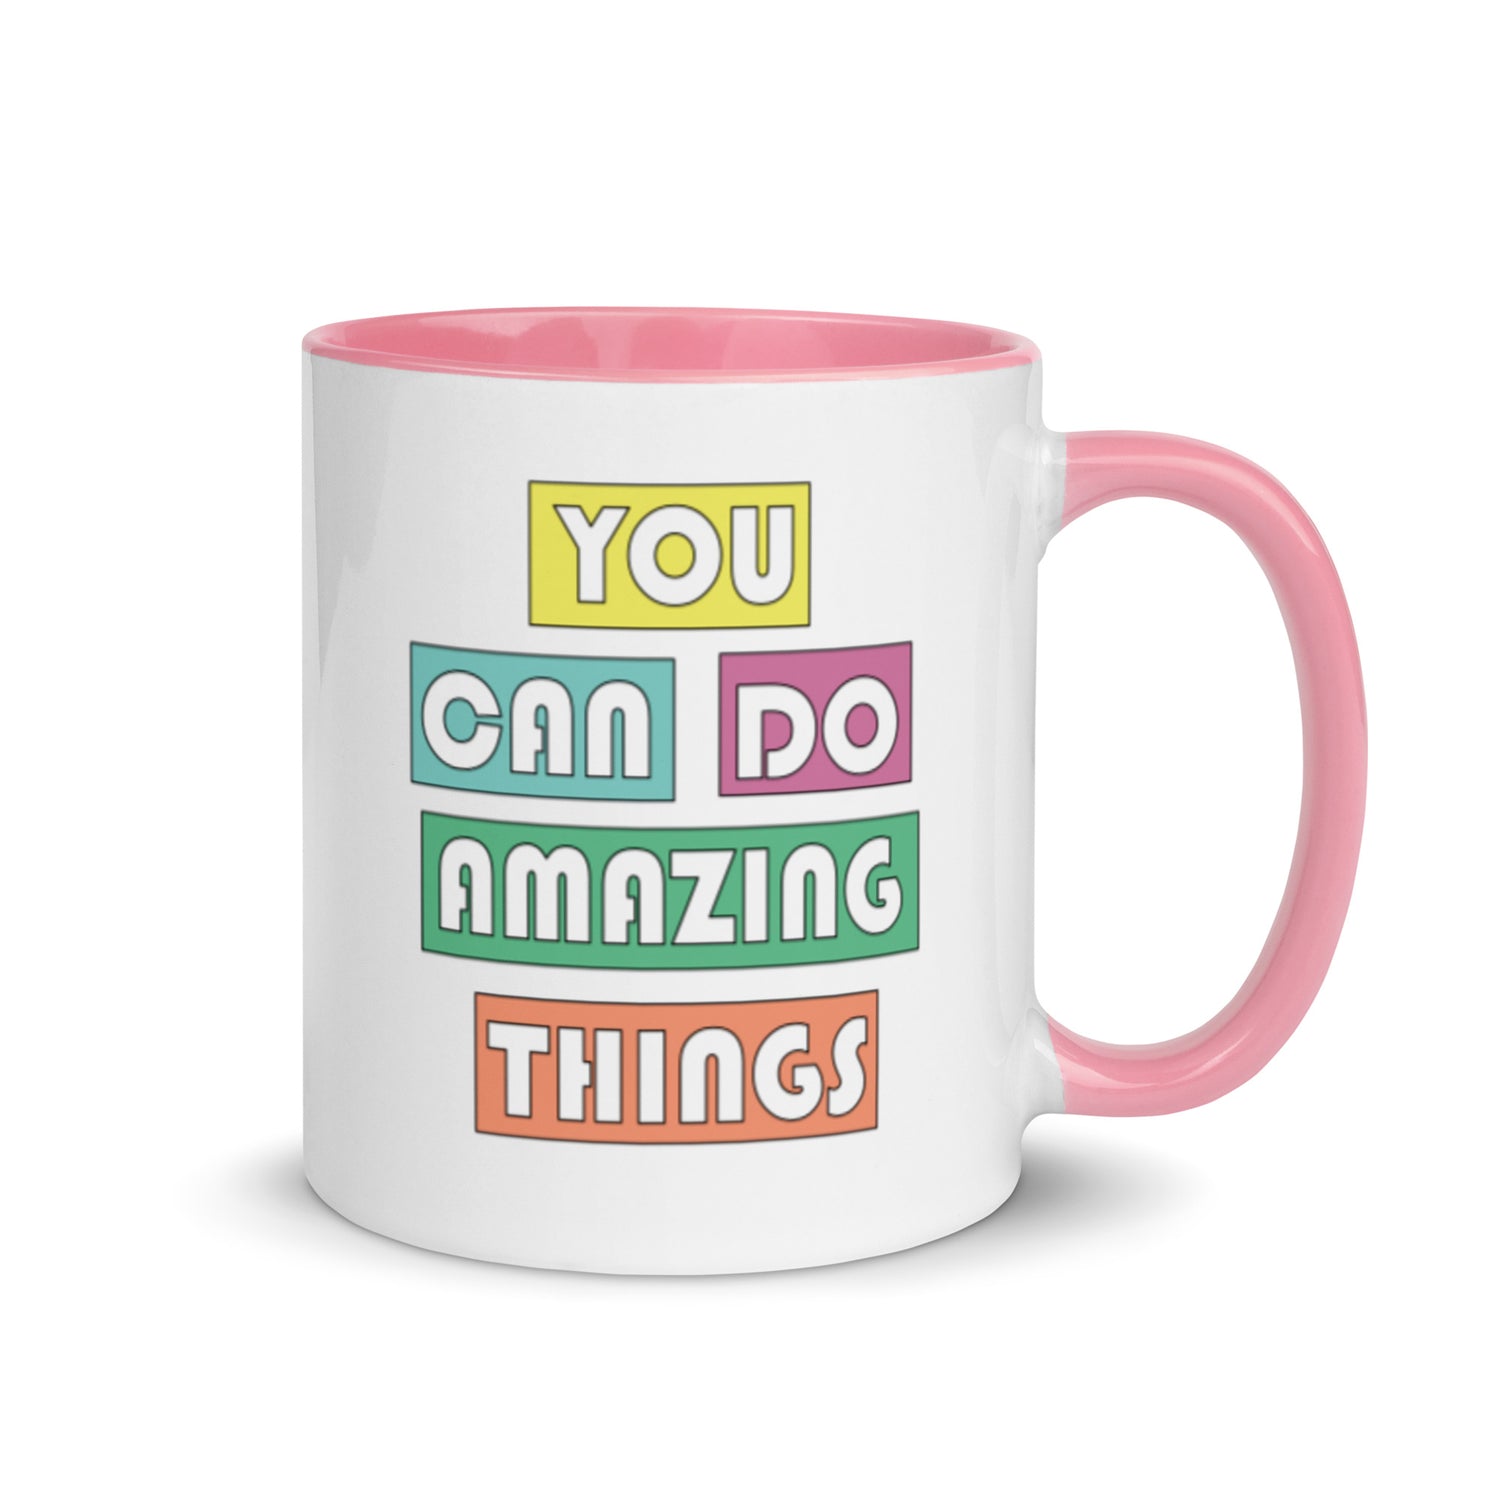 you can do amazing things mug with pink interior